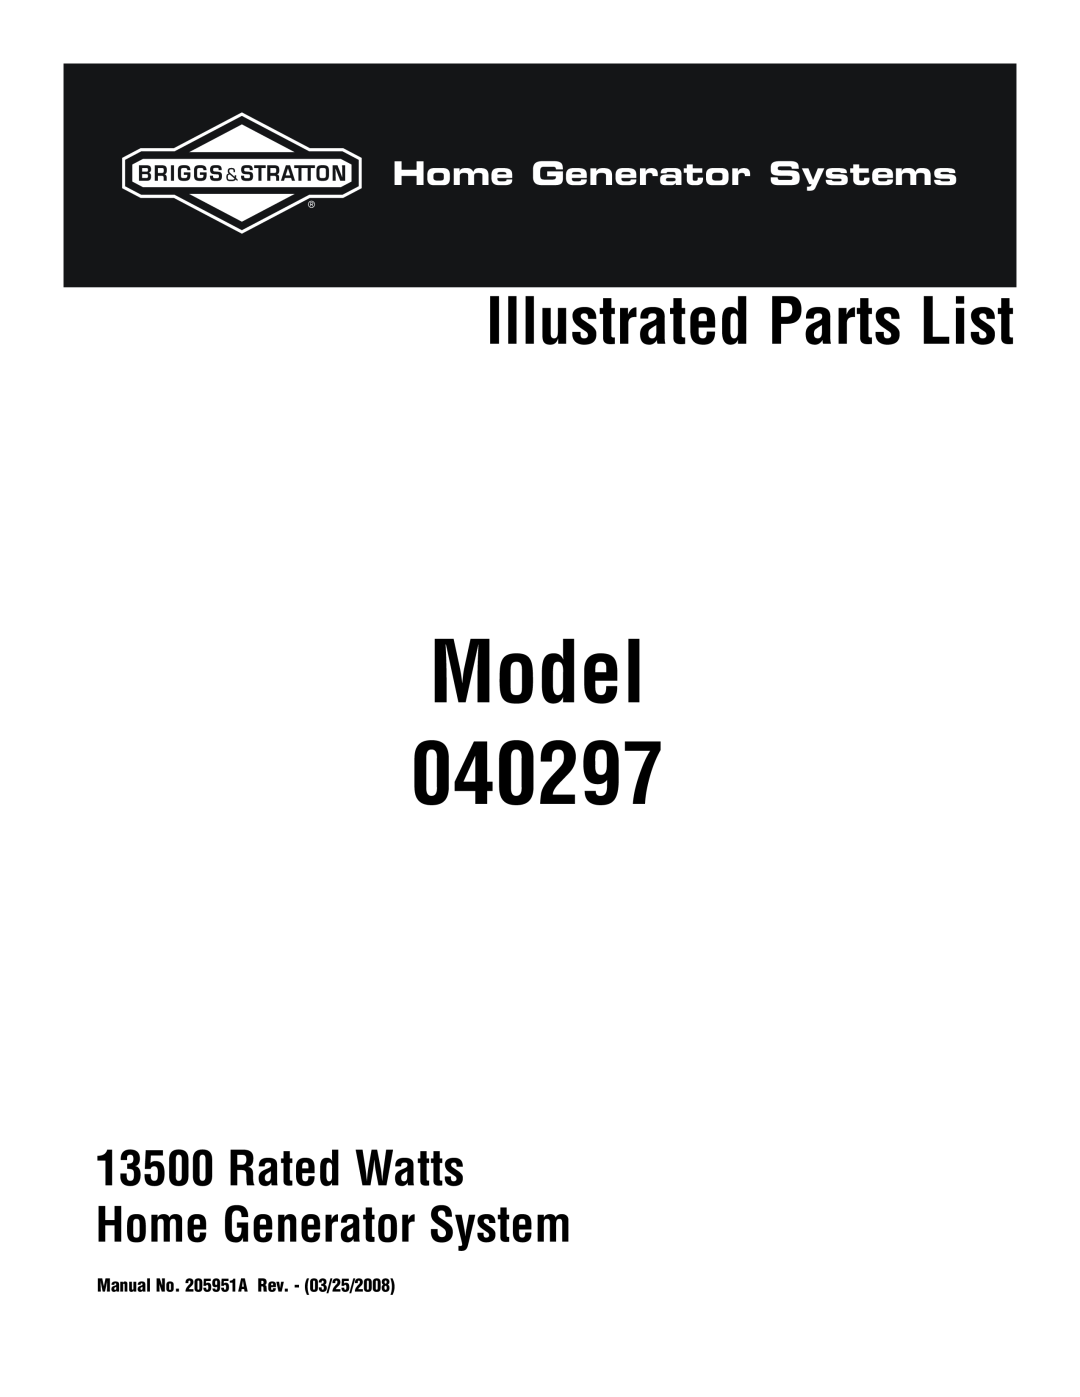 Briggs & Stratton 40297 manual Model, Illustrated Parts List, Rated Watts Home Generator System, Home Generator Systems 